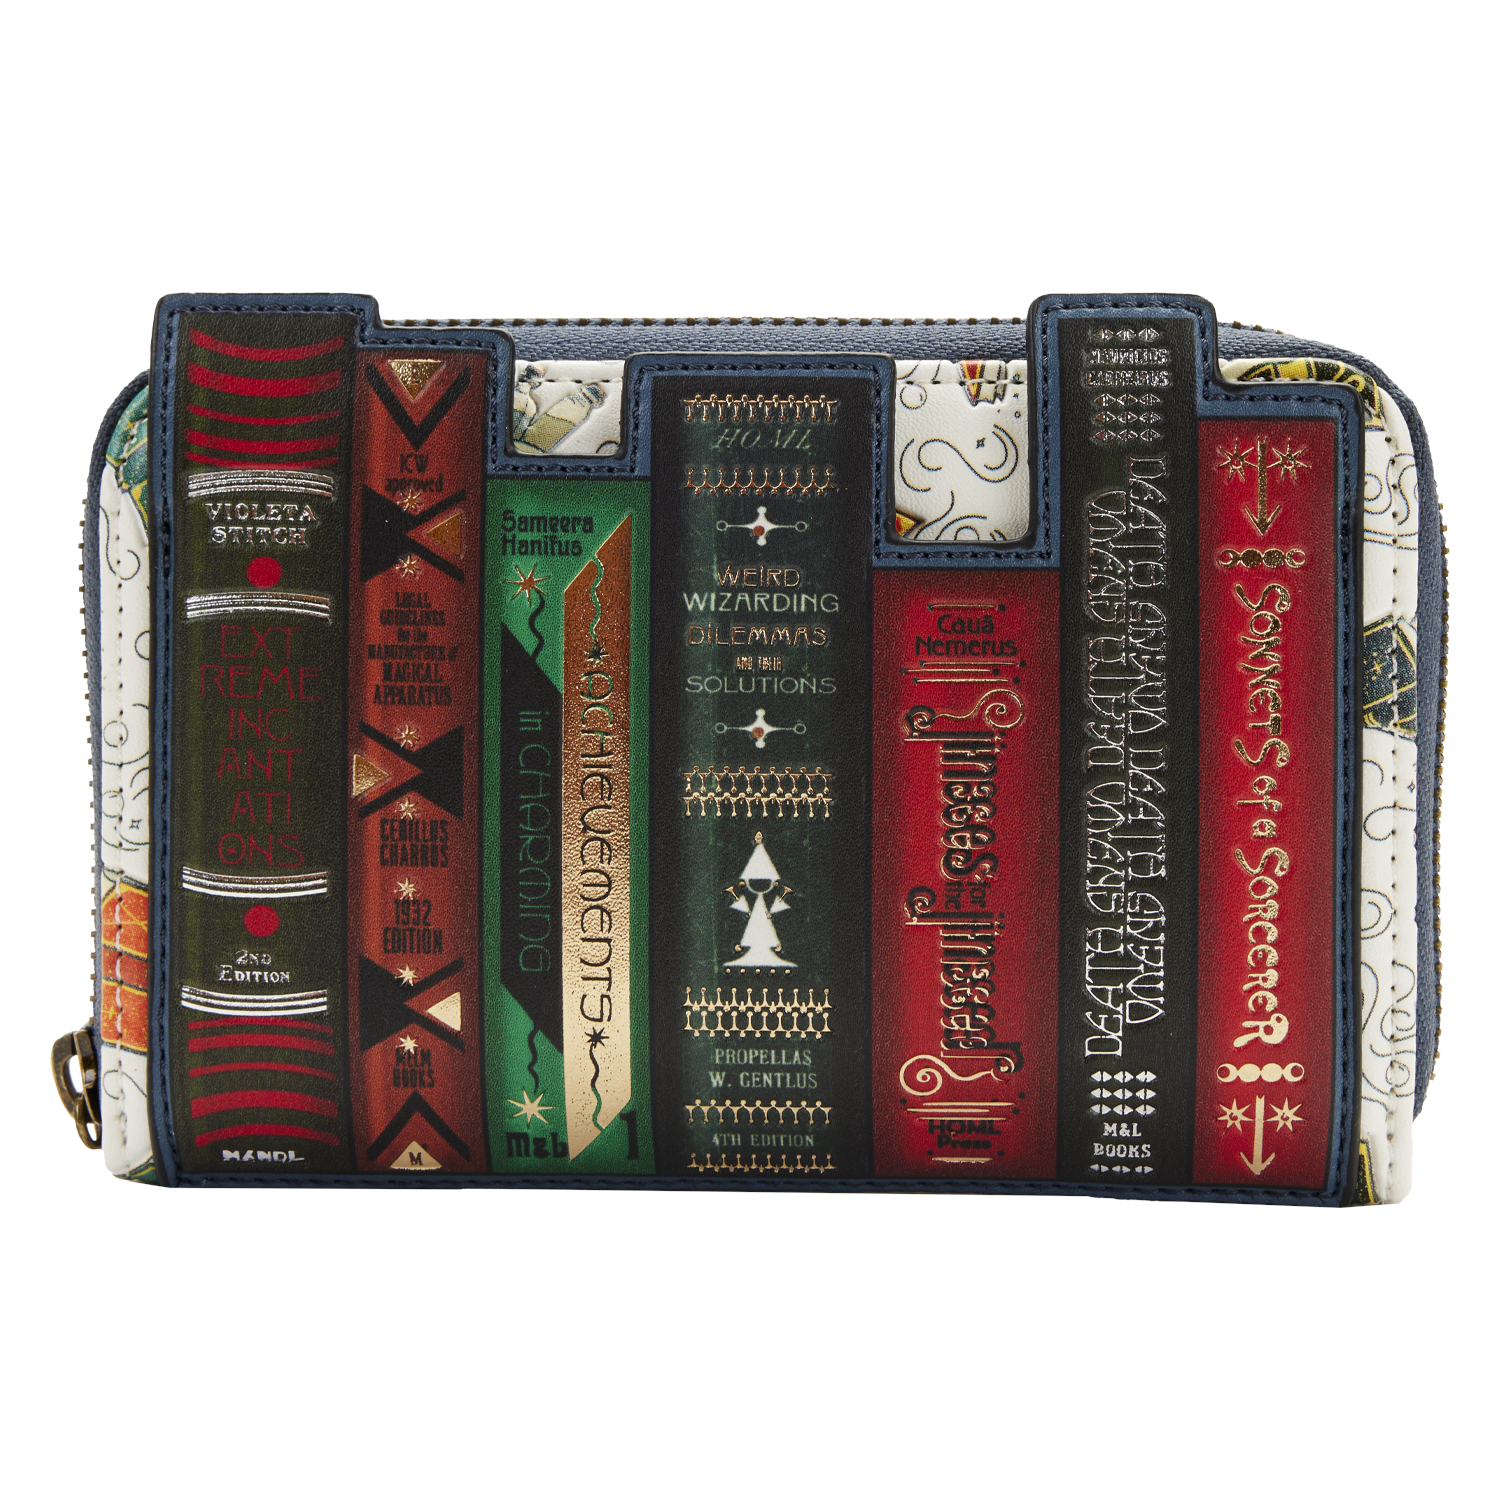 The Fantastic Beasts Magical Books Zip Around Wallet matches the backpack and crossbody bag with its textbook theme.